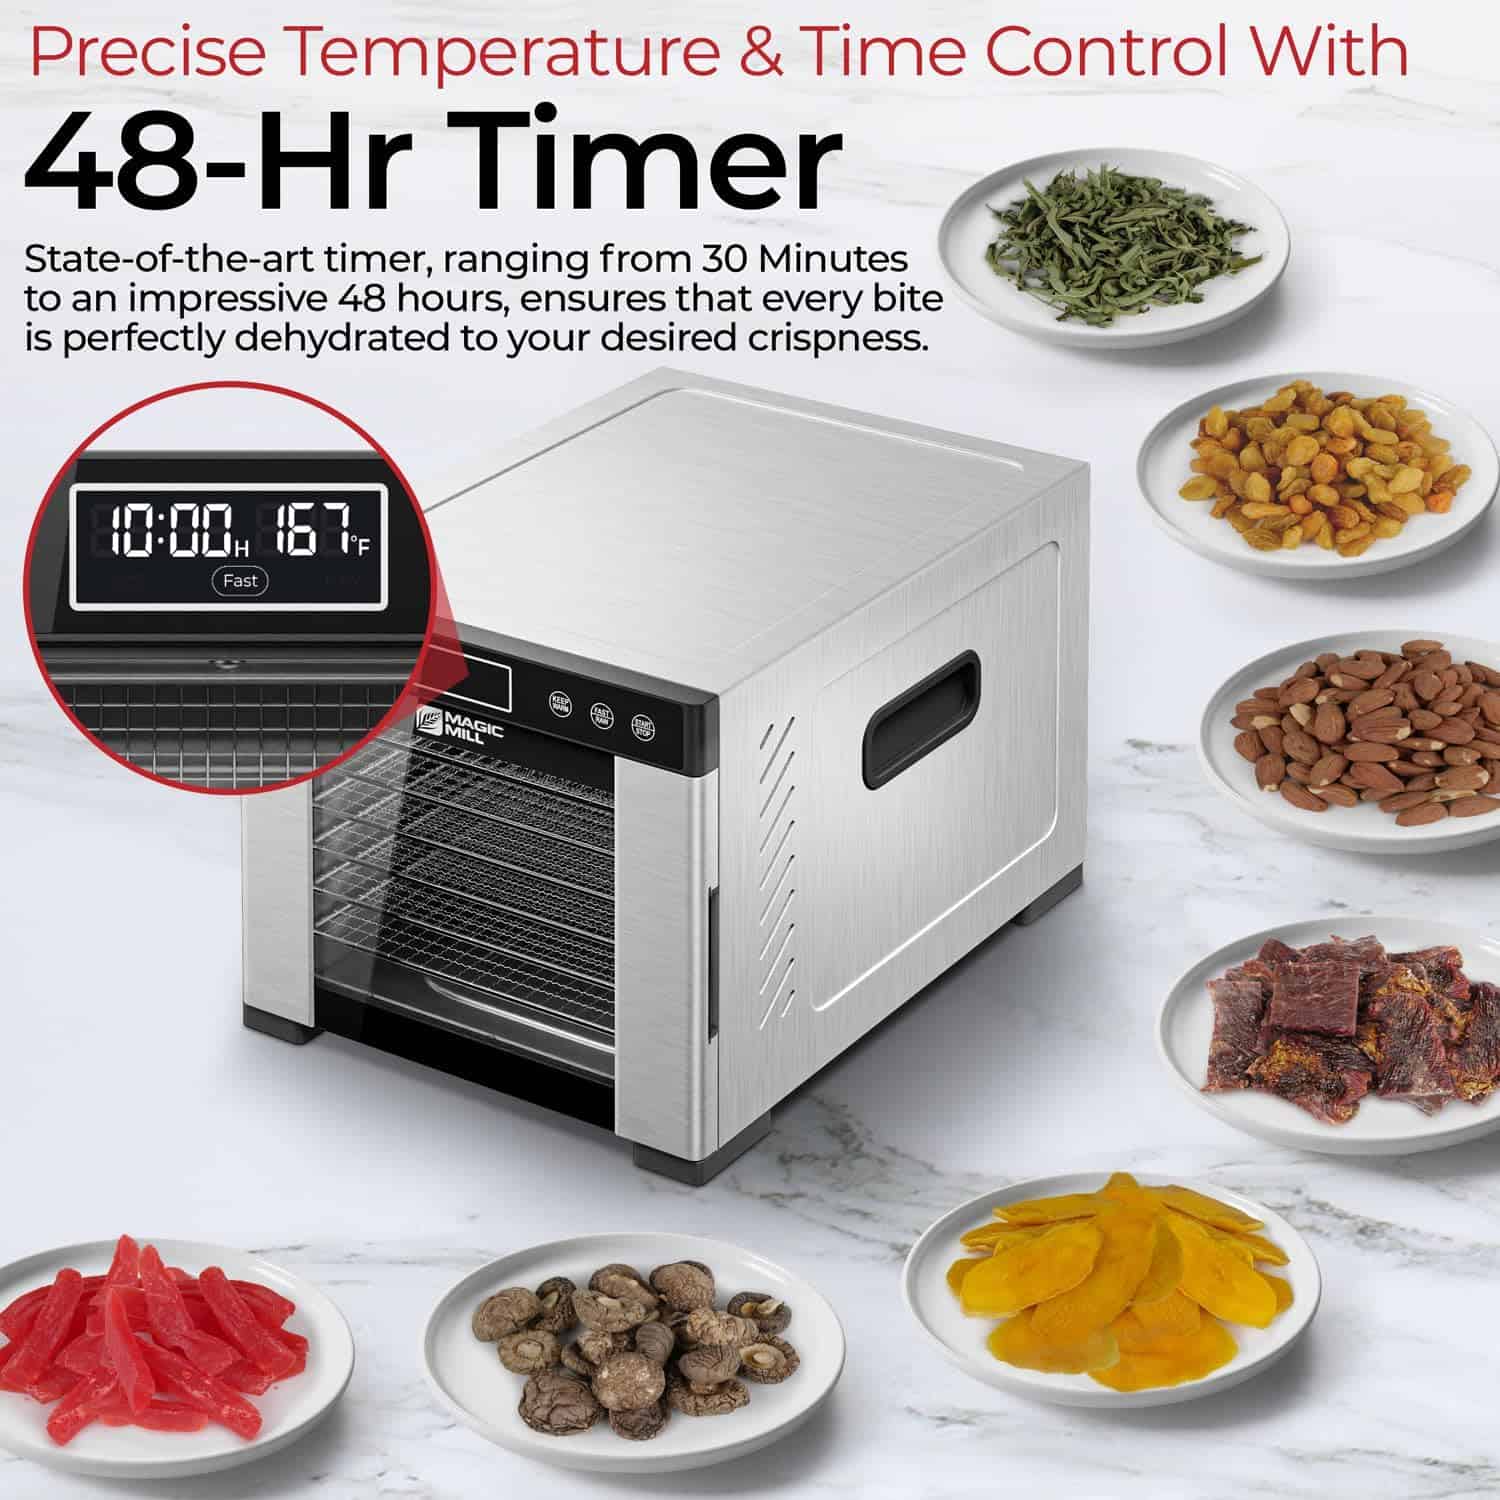 Magic Mill Pro Food Dehydrator Machine surounded by food